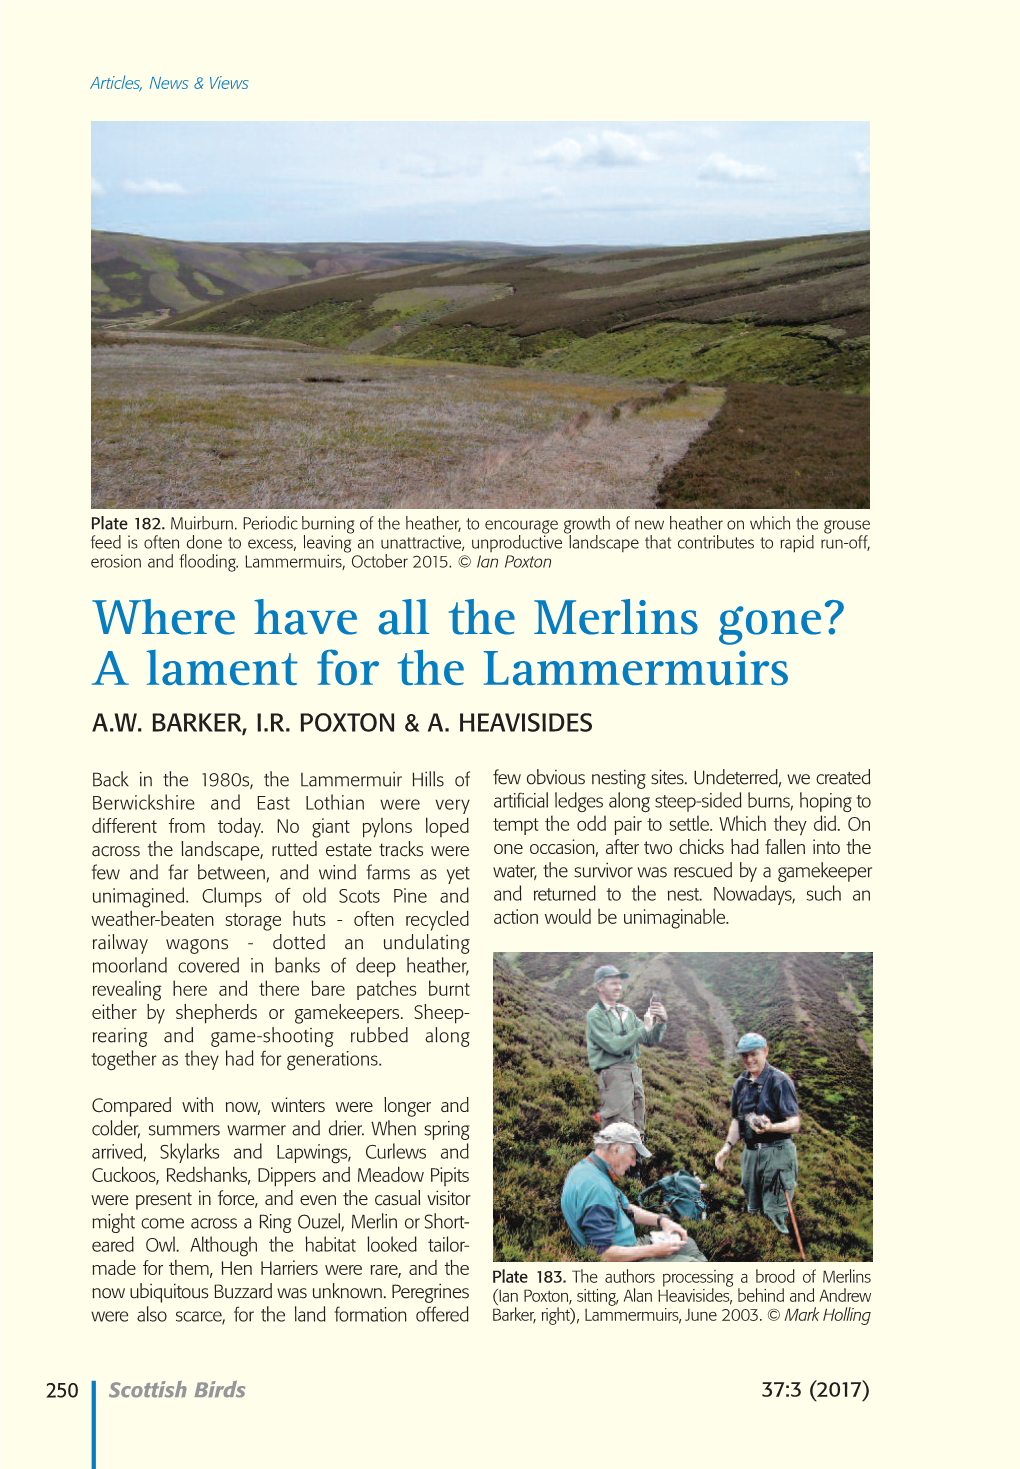 Where Have All the Merlins Gone? a Lament for the Lammermuirs A.W